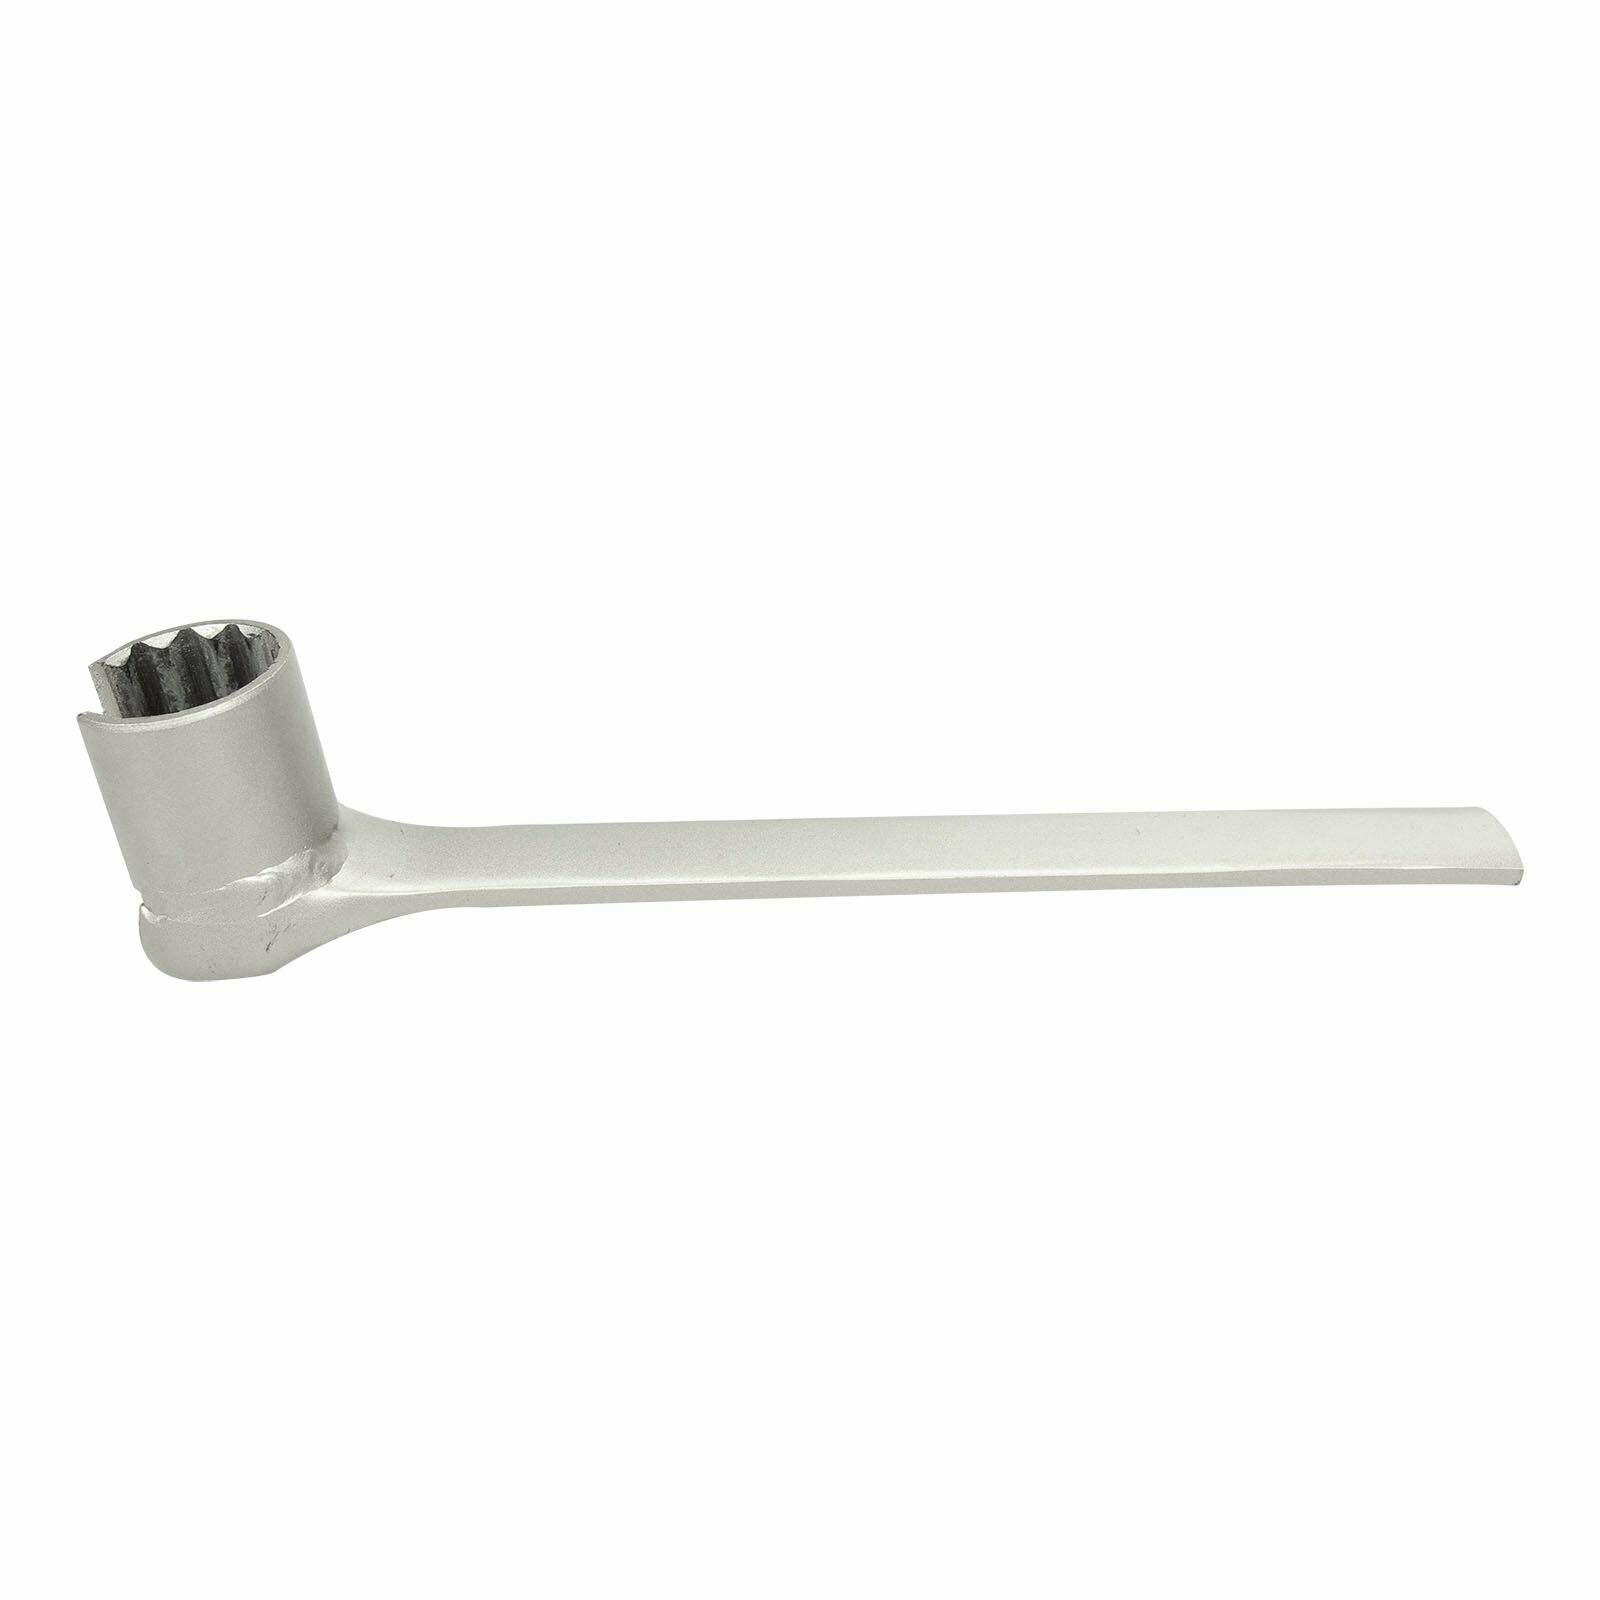 For Ford 7.3 7.3L POWERSTROKE IPR VALVE REMOVAL TOOL